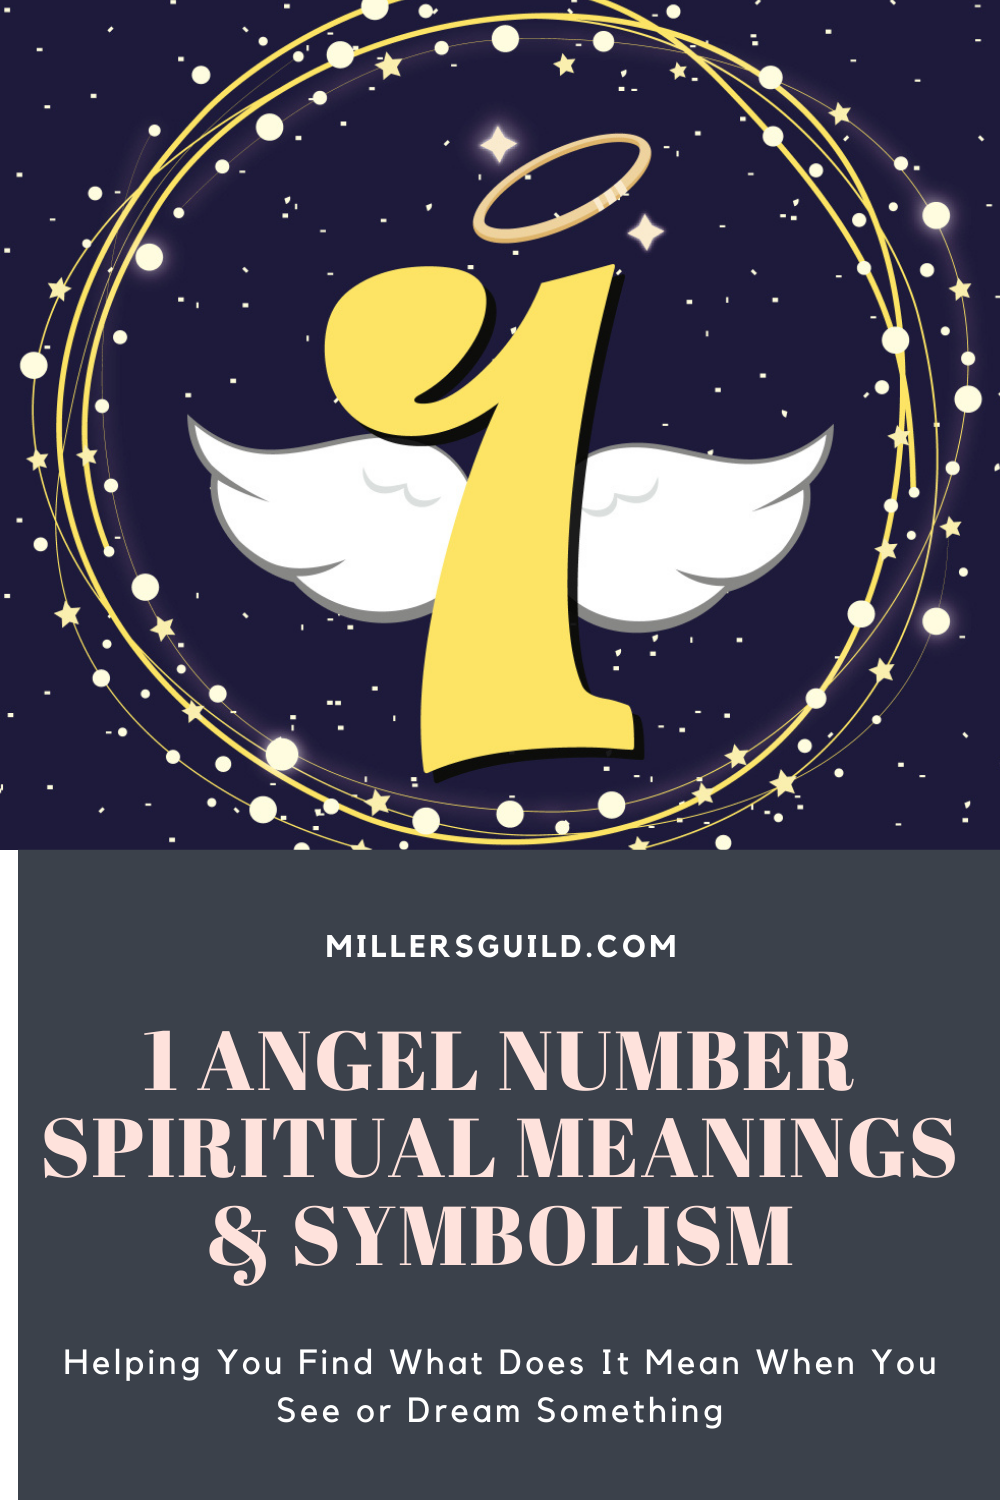 1 Angel Number Spiritual Meanings & Symbolism 2